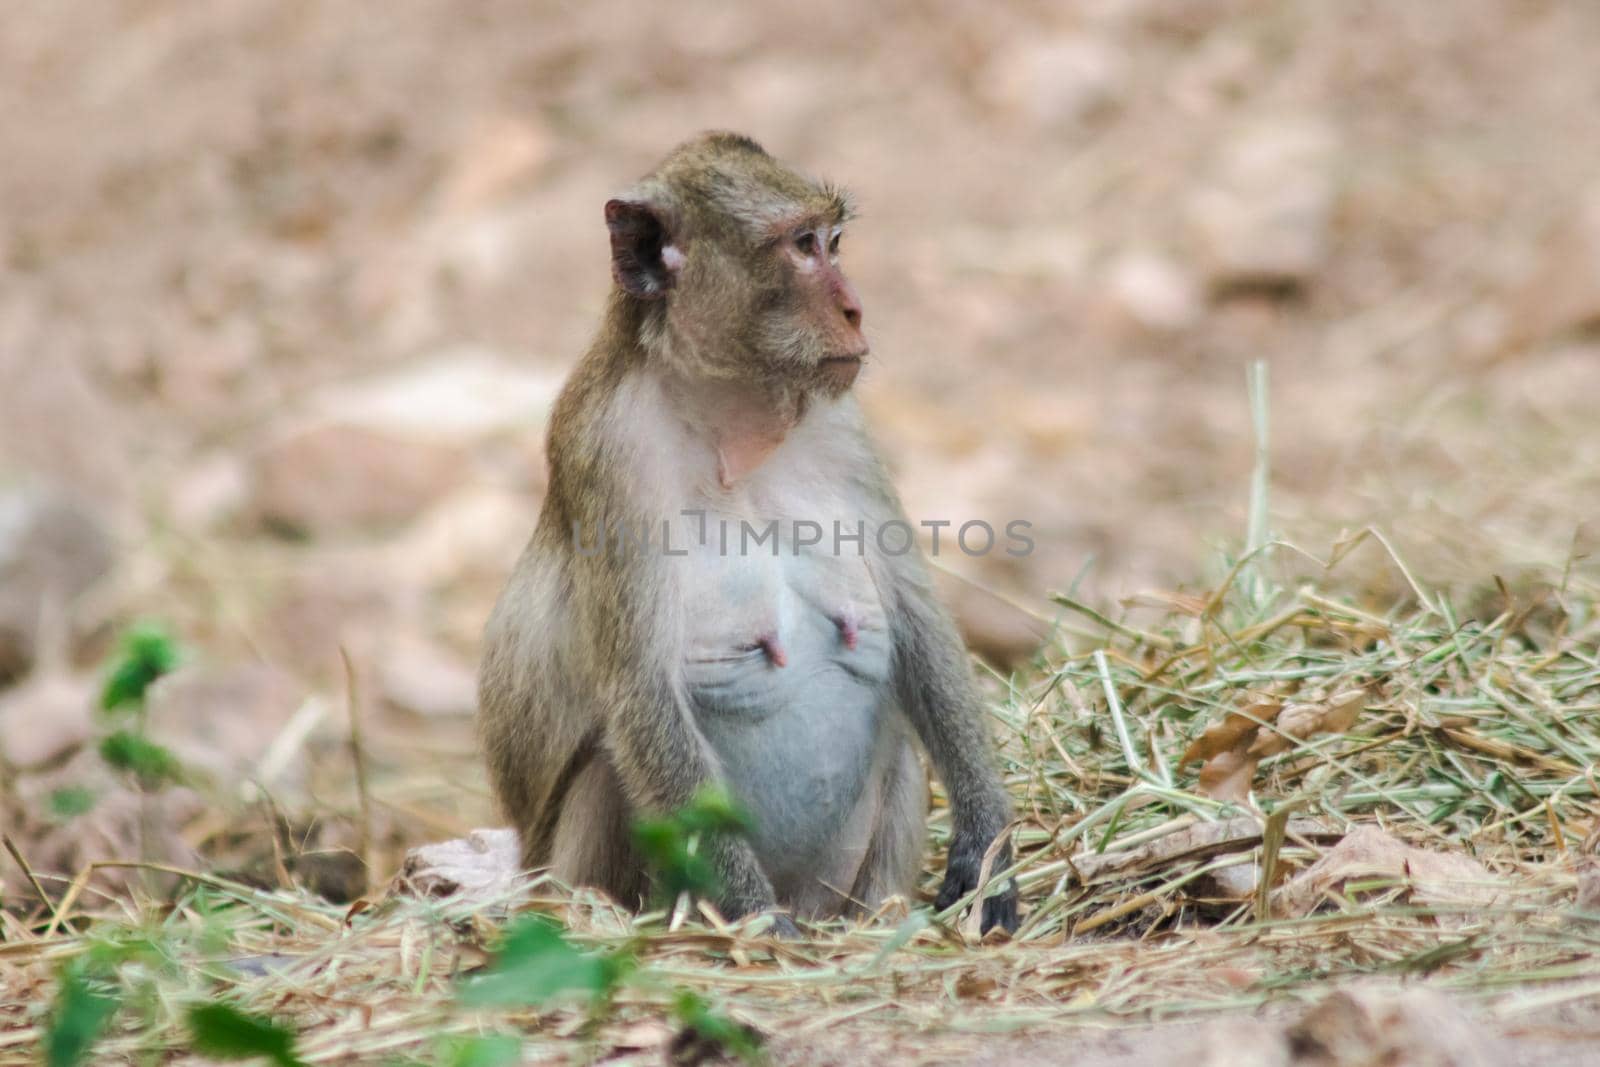 Crab-eating Macaque has gray to reddish-brown fur covering its body.